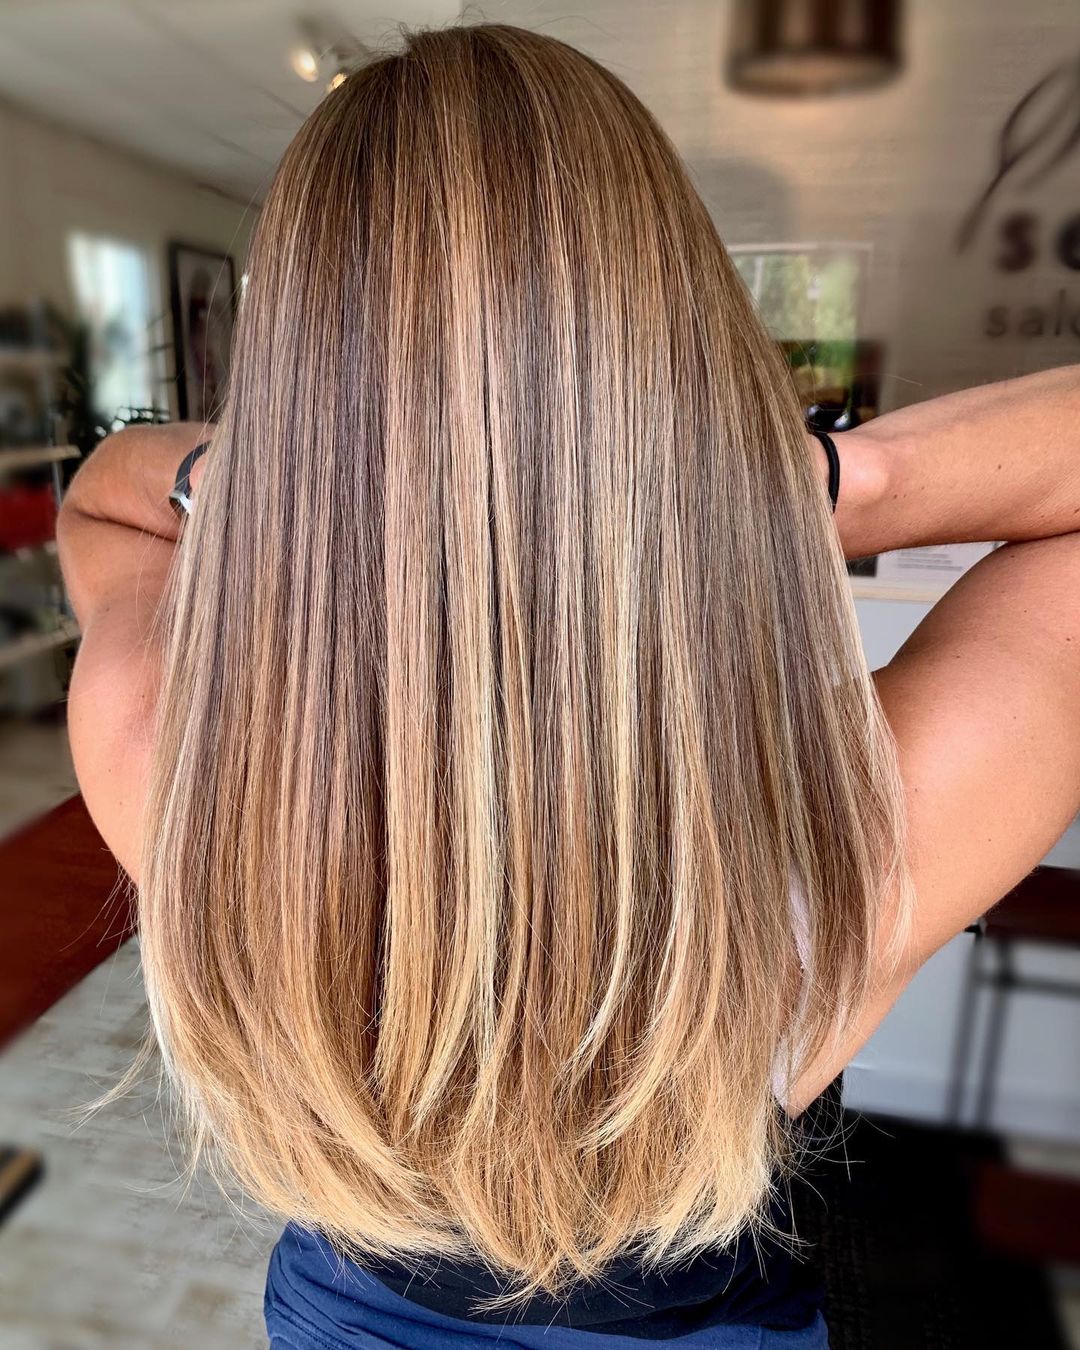 Balayage Hair Colors Top 75+ Hair Color Ideas for Women - 5